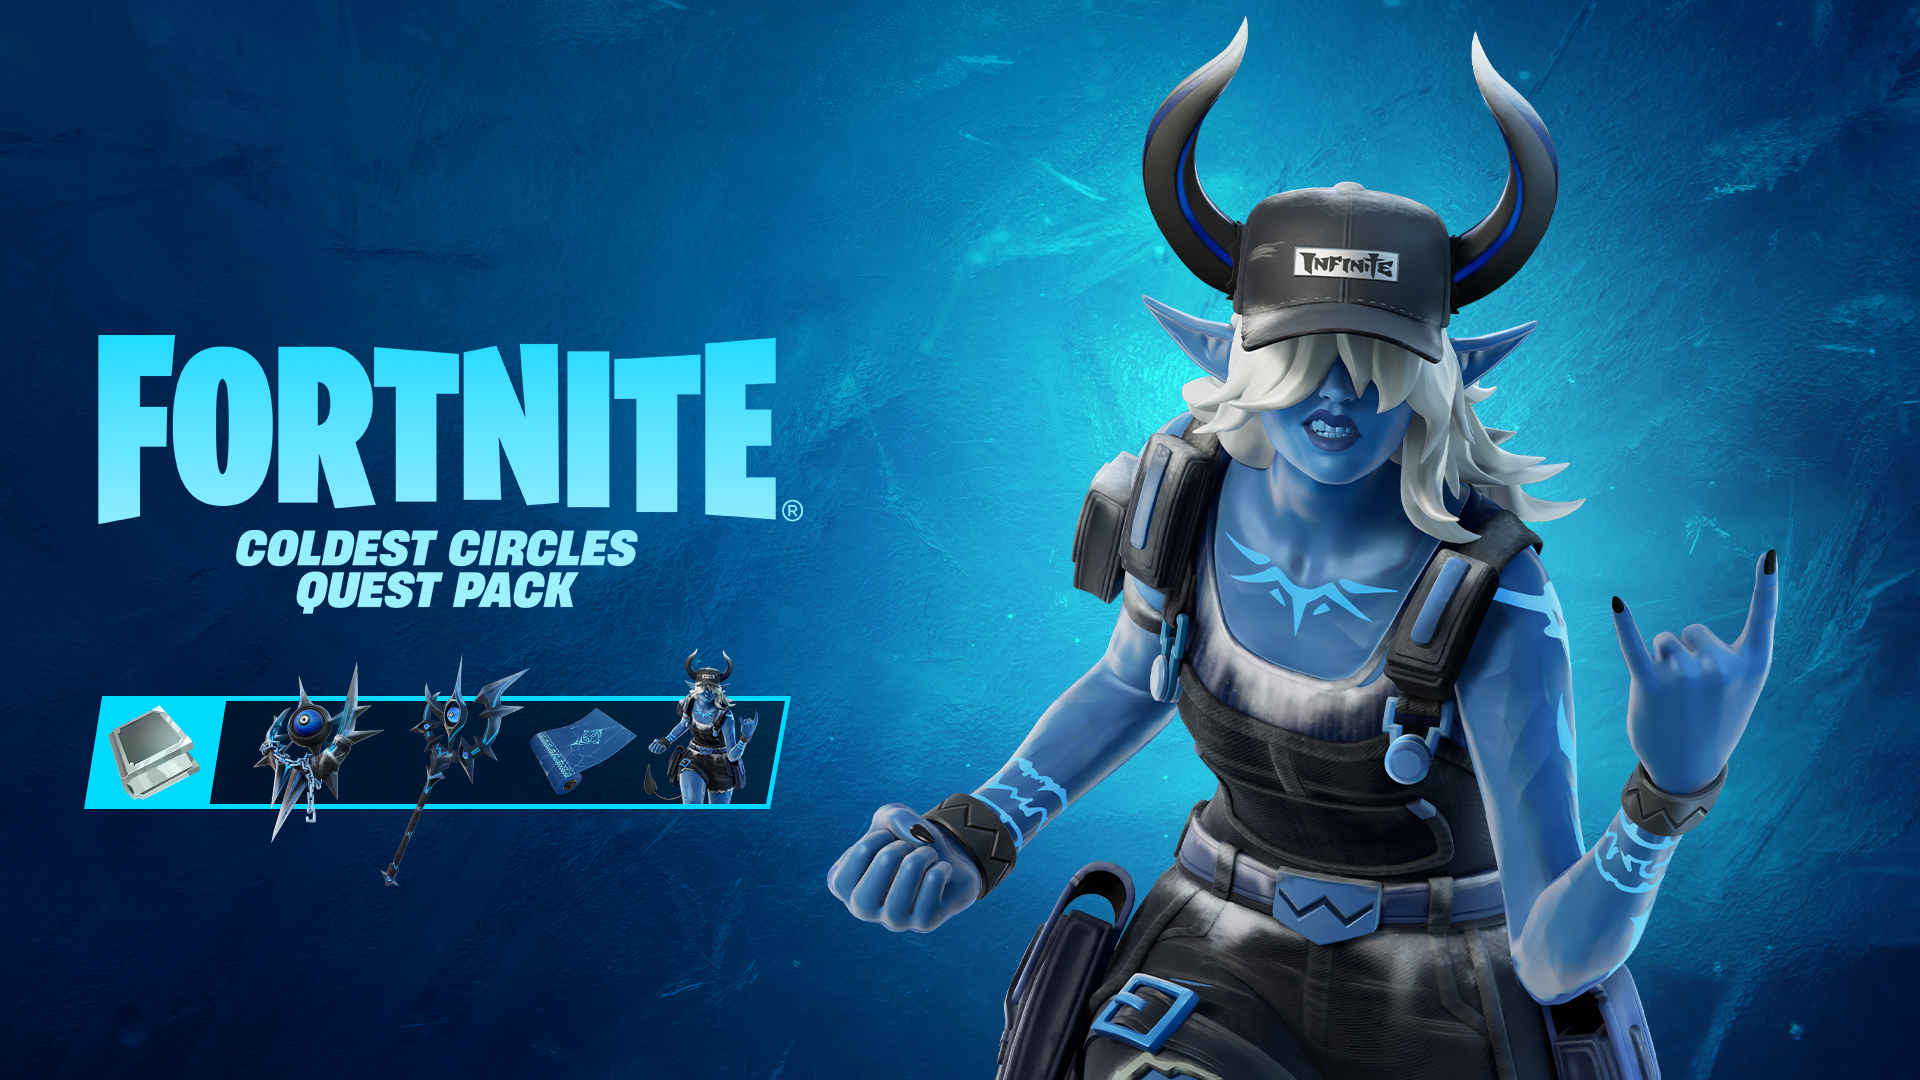 Fortnite on Twitter: "Time to unleash some chaos… seems chill 🤙 Claim the Coldest Circle Quest Pack from favorite platform store or swing by the Item https://t.co/Vhv9AM4Mic" / Twitter